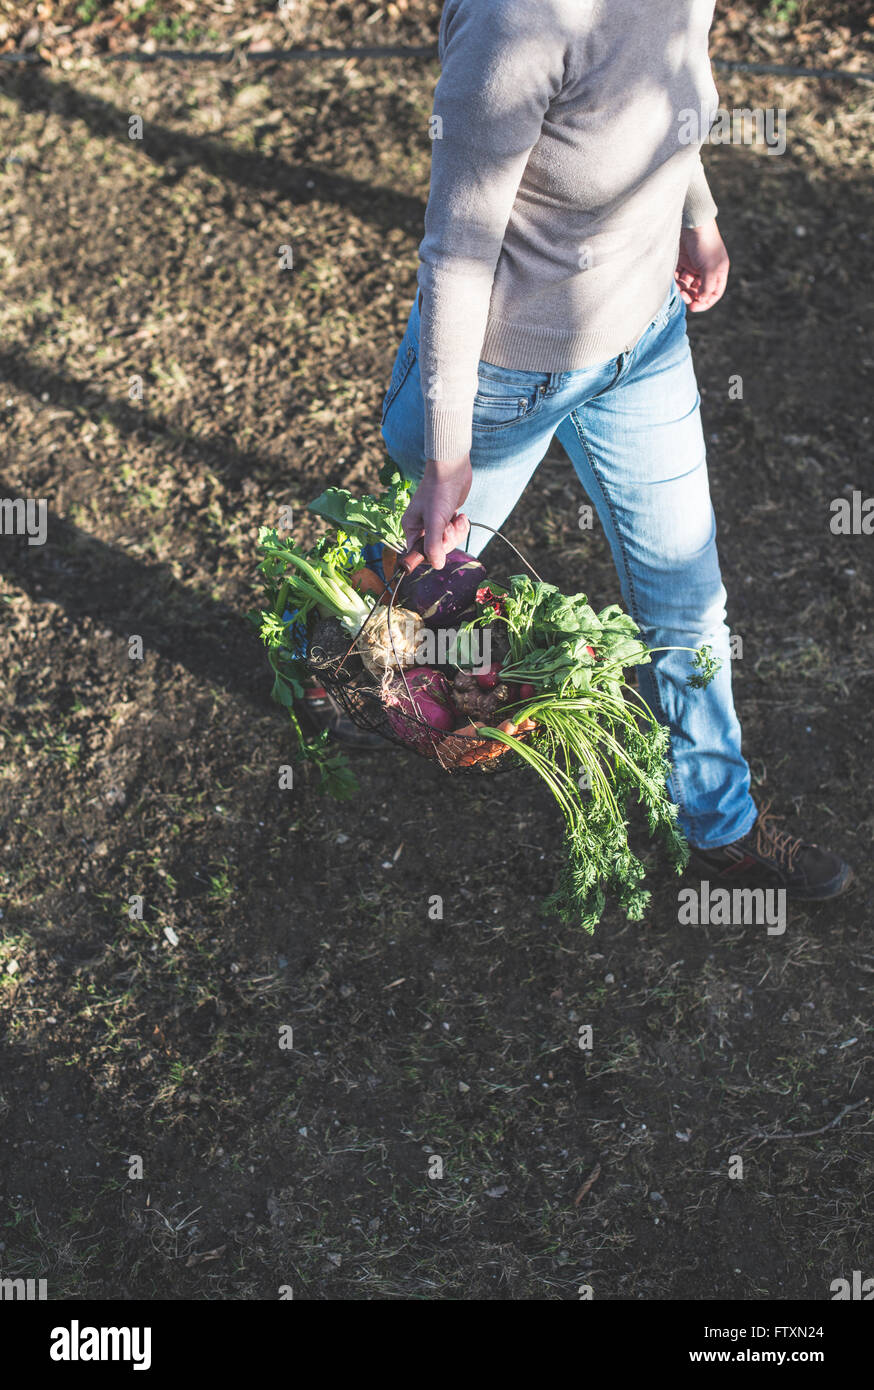 Elevated view of woman carrying basket with fresh vegetables Stock Photo